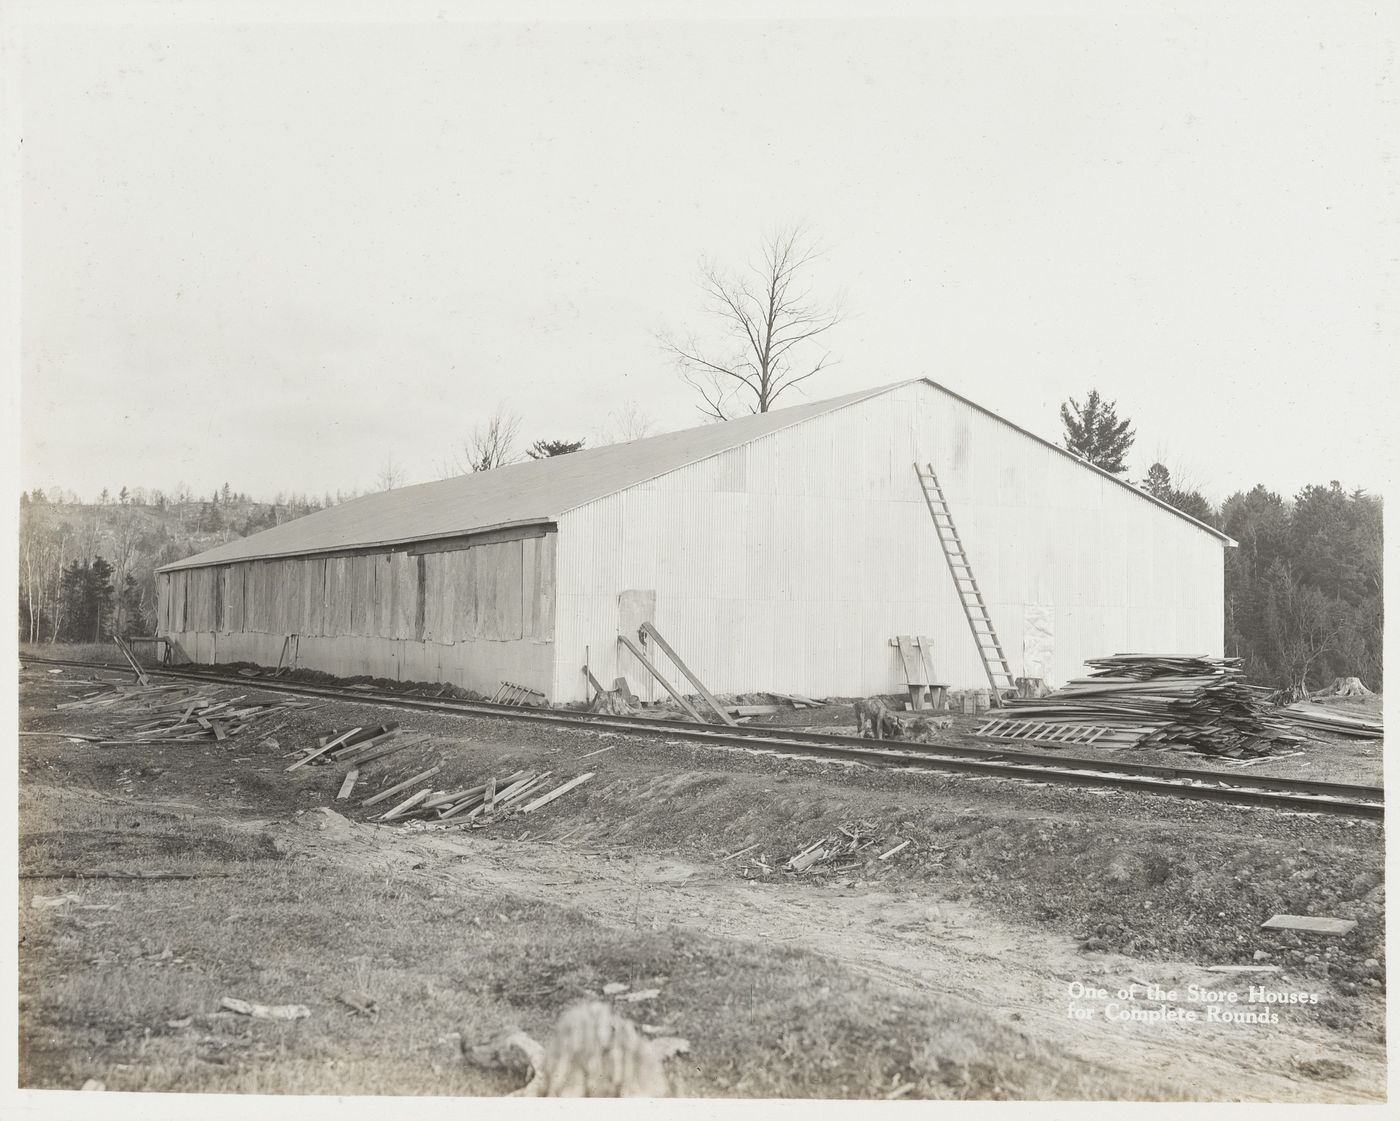 Exterior view of store house for complete rounds at the Energite Explosives Plant No. 3, the Shell Loading Plant, Renfrew, Ontario, Canada